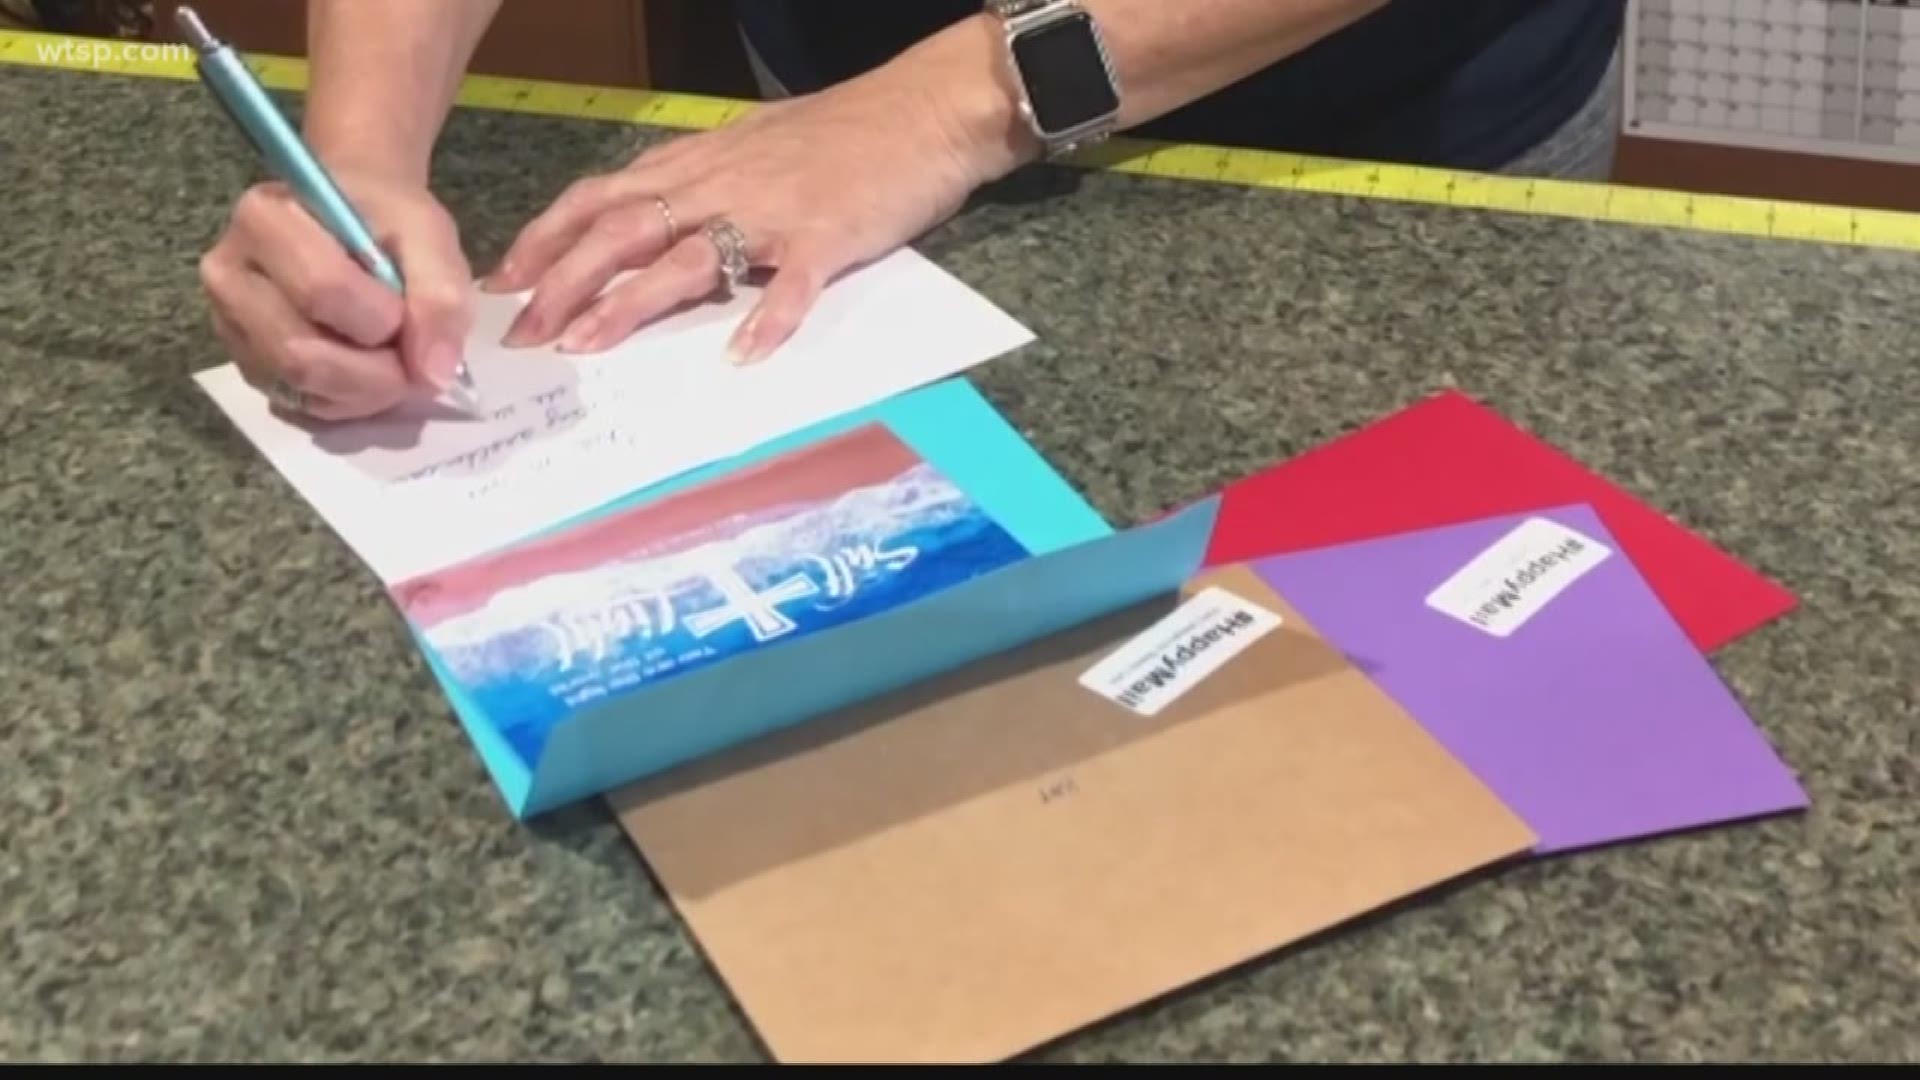 Stacey Lynn Milholland’s started taking requests from neighbors and strangers to send her handmade cards to their loved ones and friends.